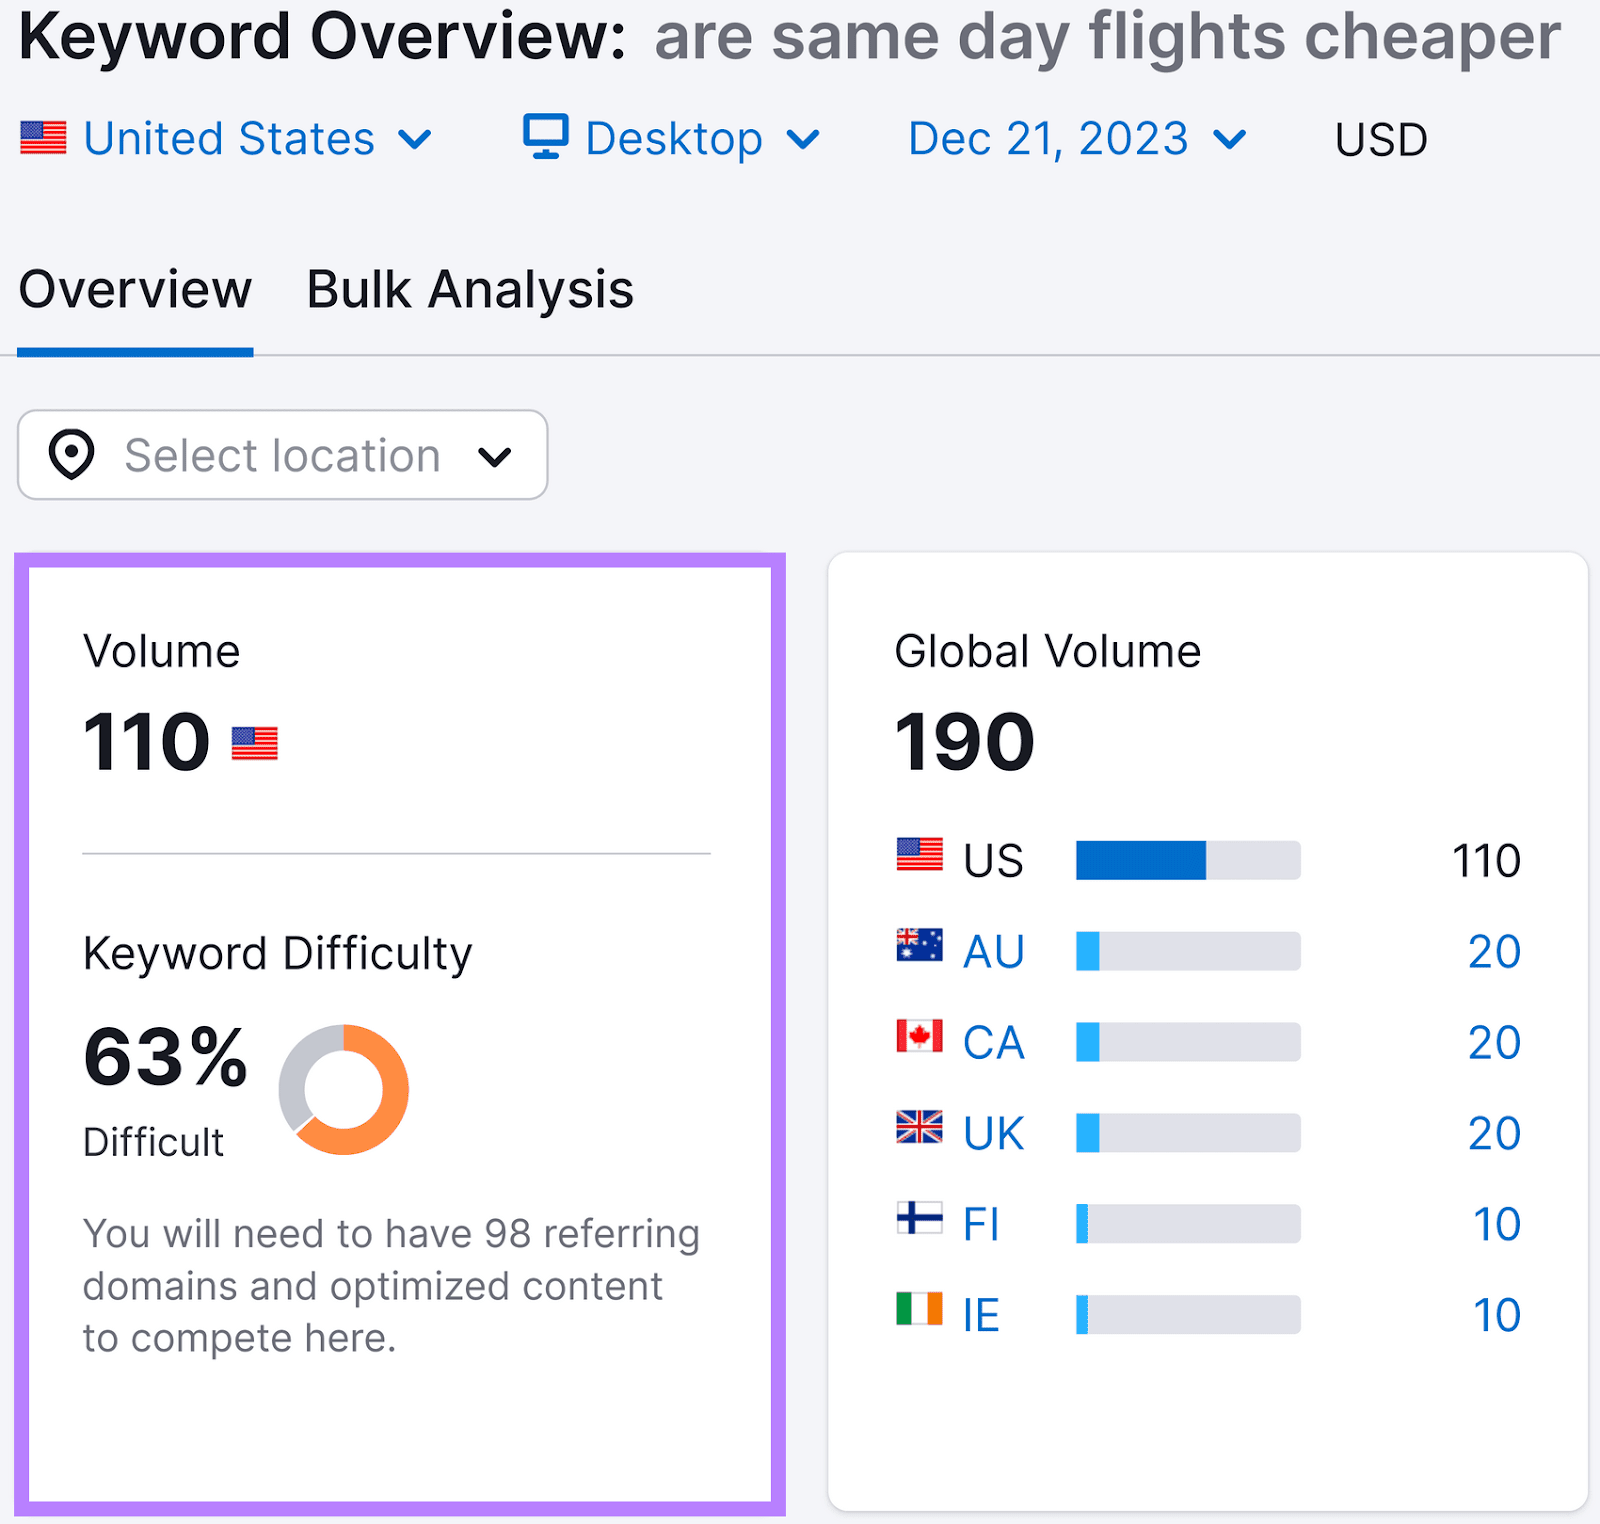 Keyword Overview results for "are same day flights cheaper" show a volume of 110 and keyword difficulty of 63%